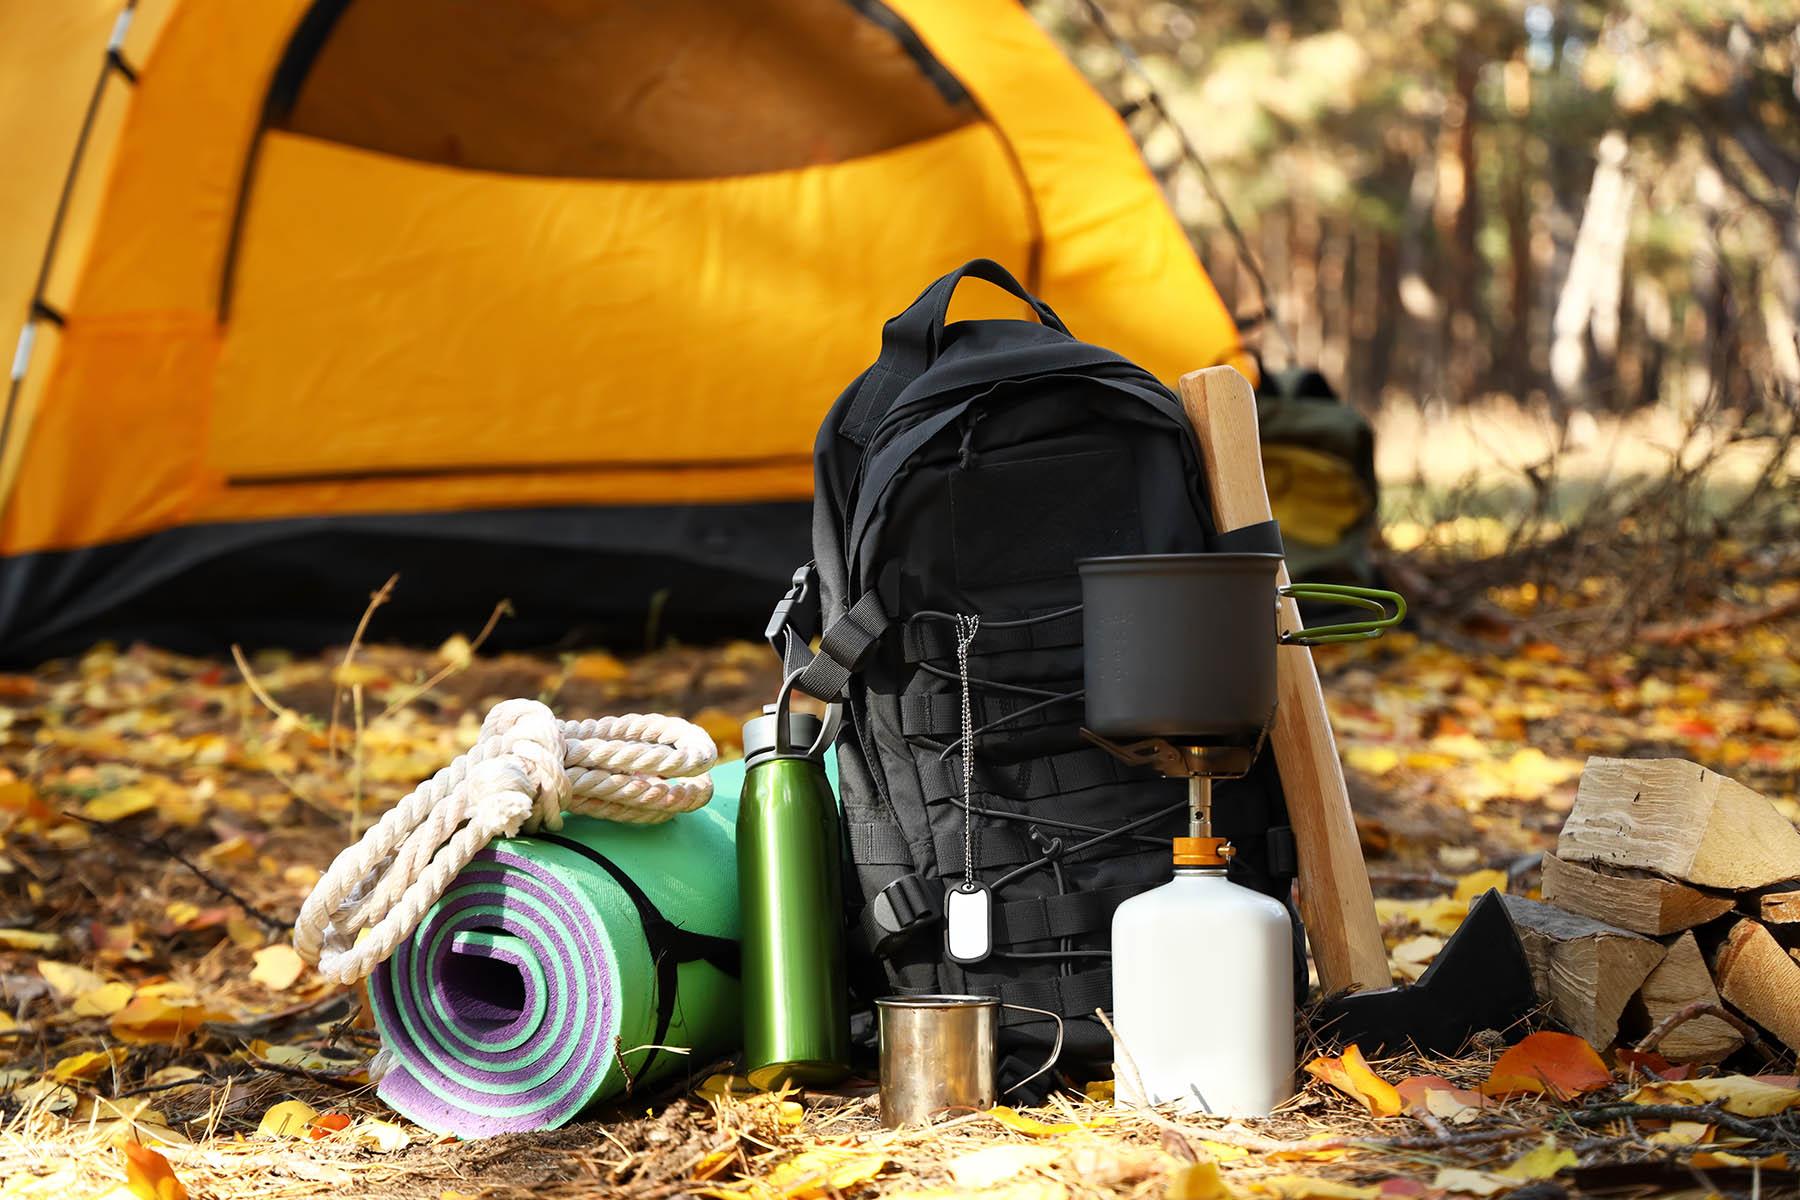 Hiking Essentials for Hocking Hills Trails: A comprehensive list of gear and essentials for a comfortable and safe hiking experience.